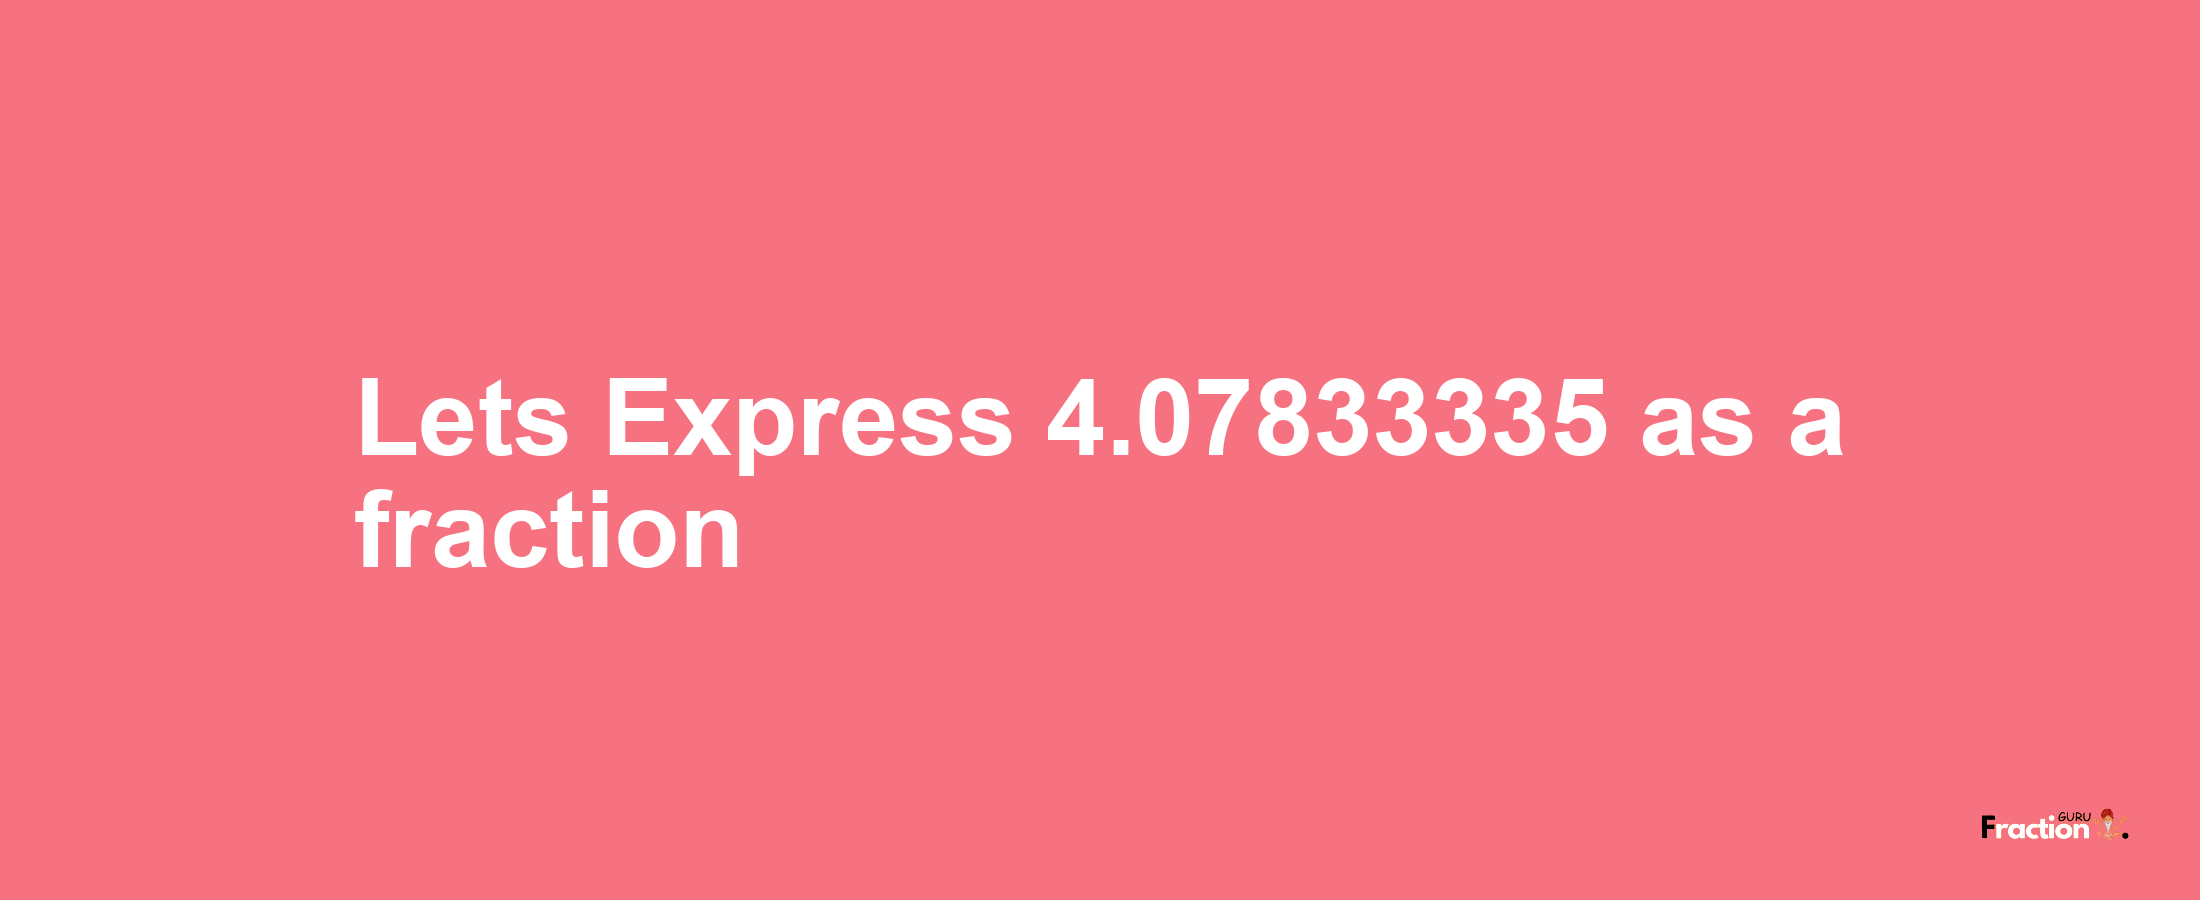 Lets Express 4.07833335 as afraction